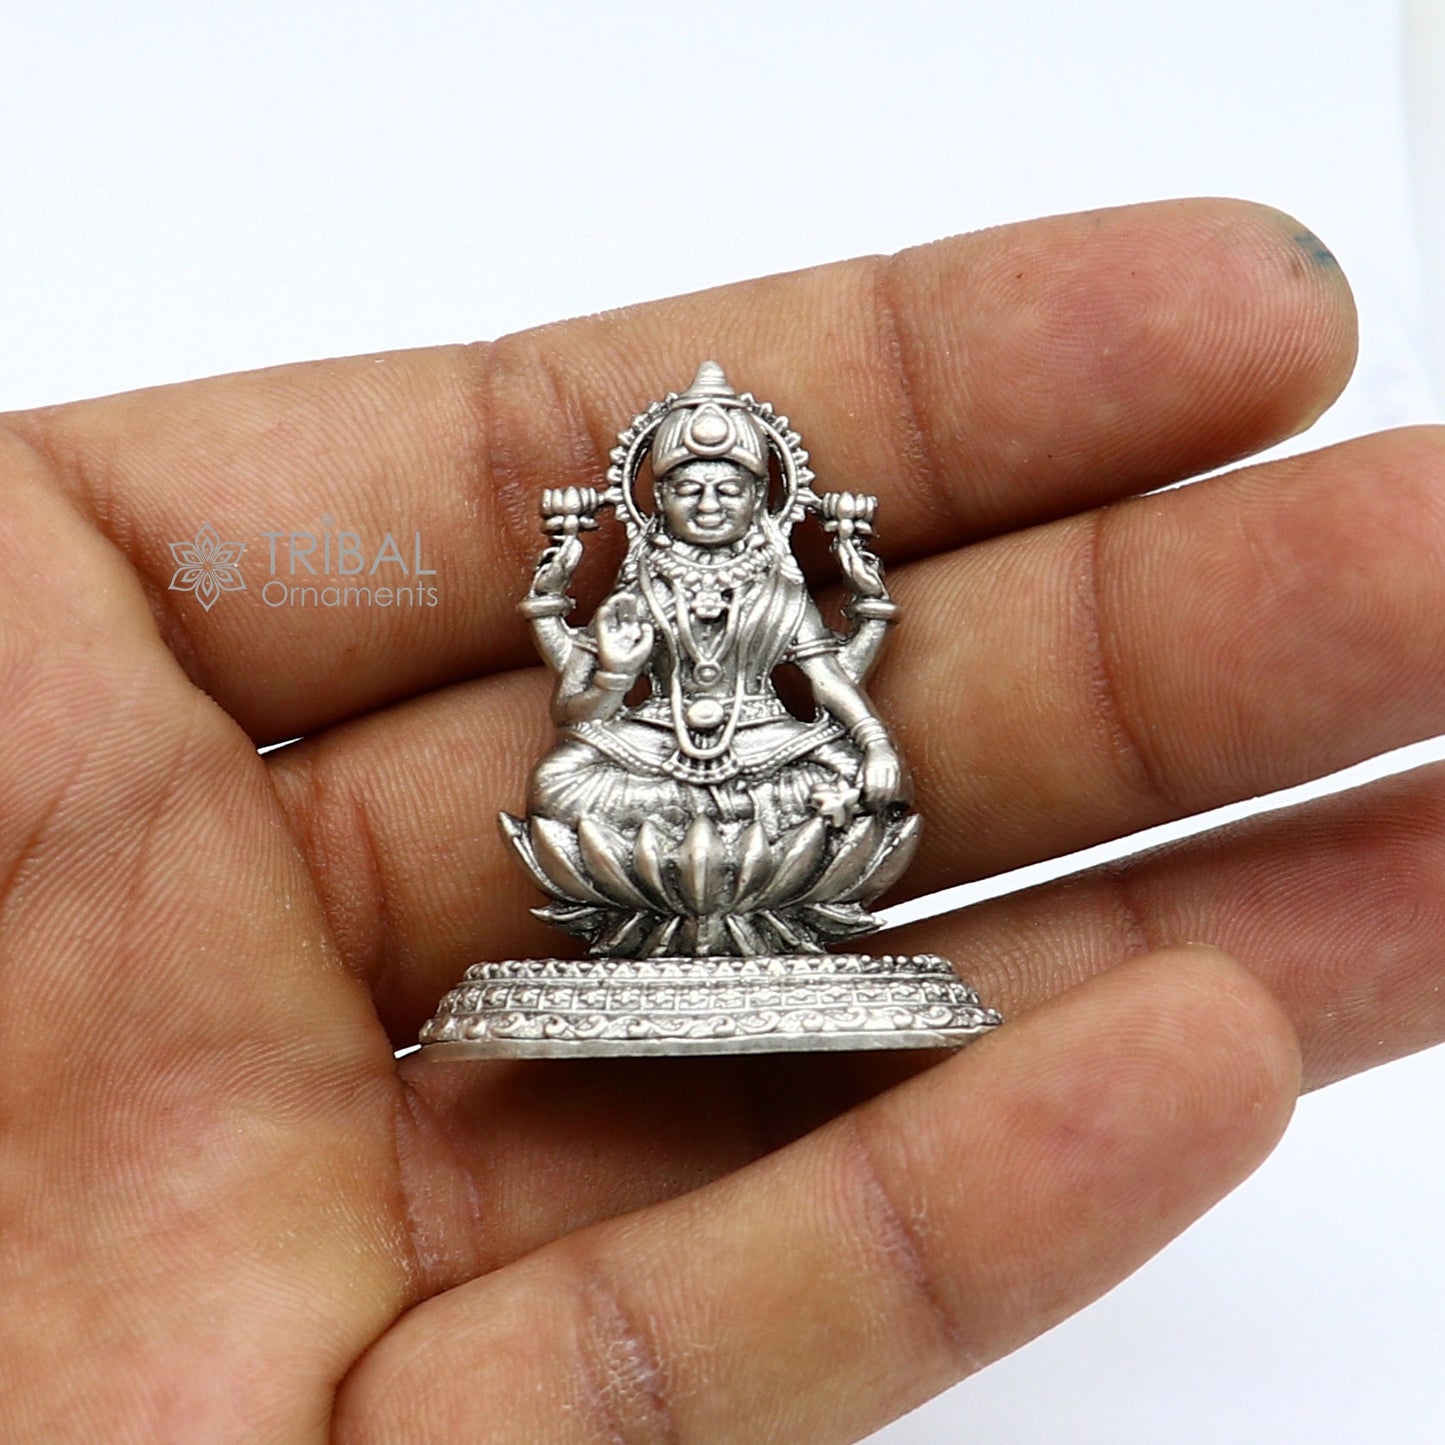 Kamlasan Goddess Lakshmi Divine statue figurine for puja,best way for Diwali festival puja or worshipping for wealth and prosperity art740 - TRIBAL ORNAMENTS